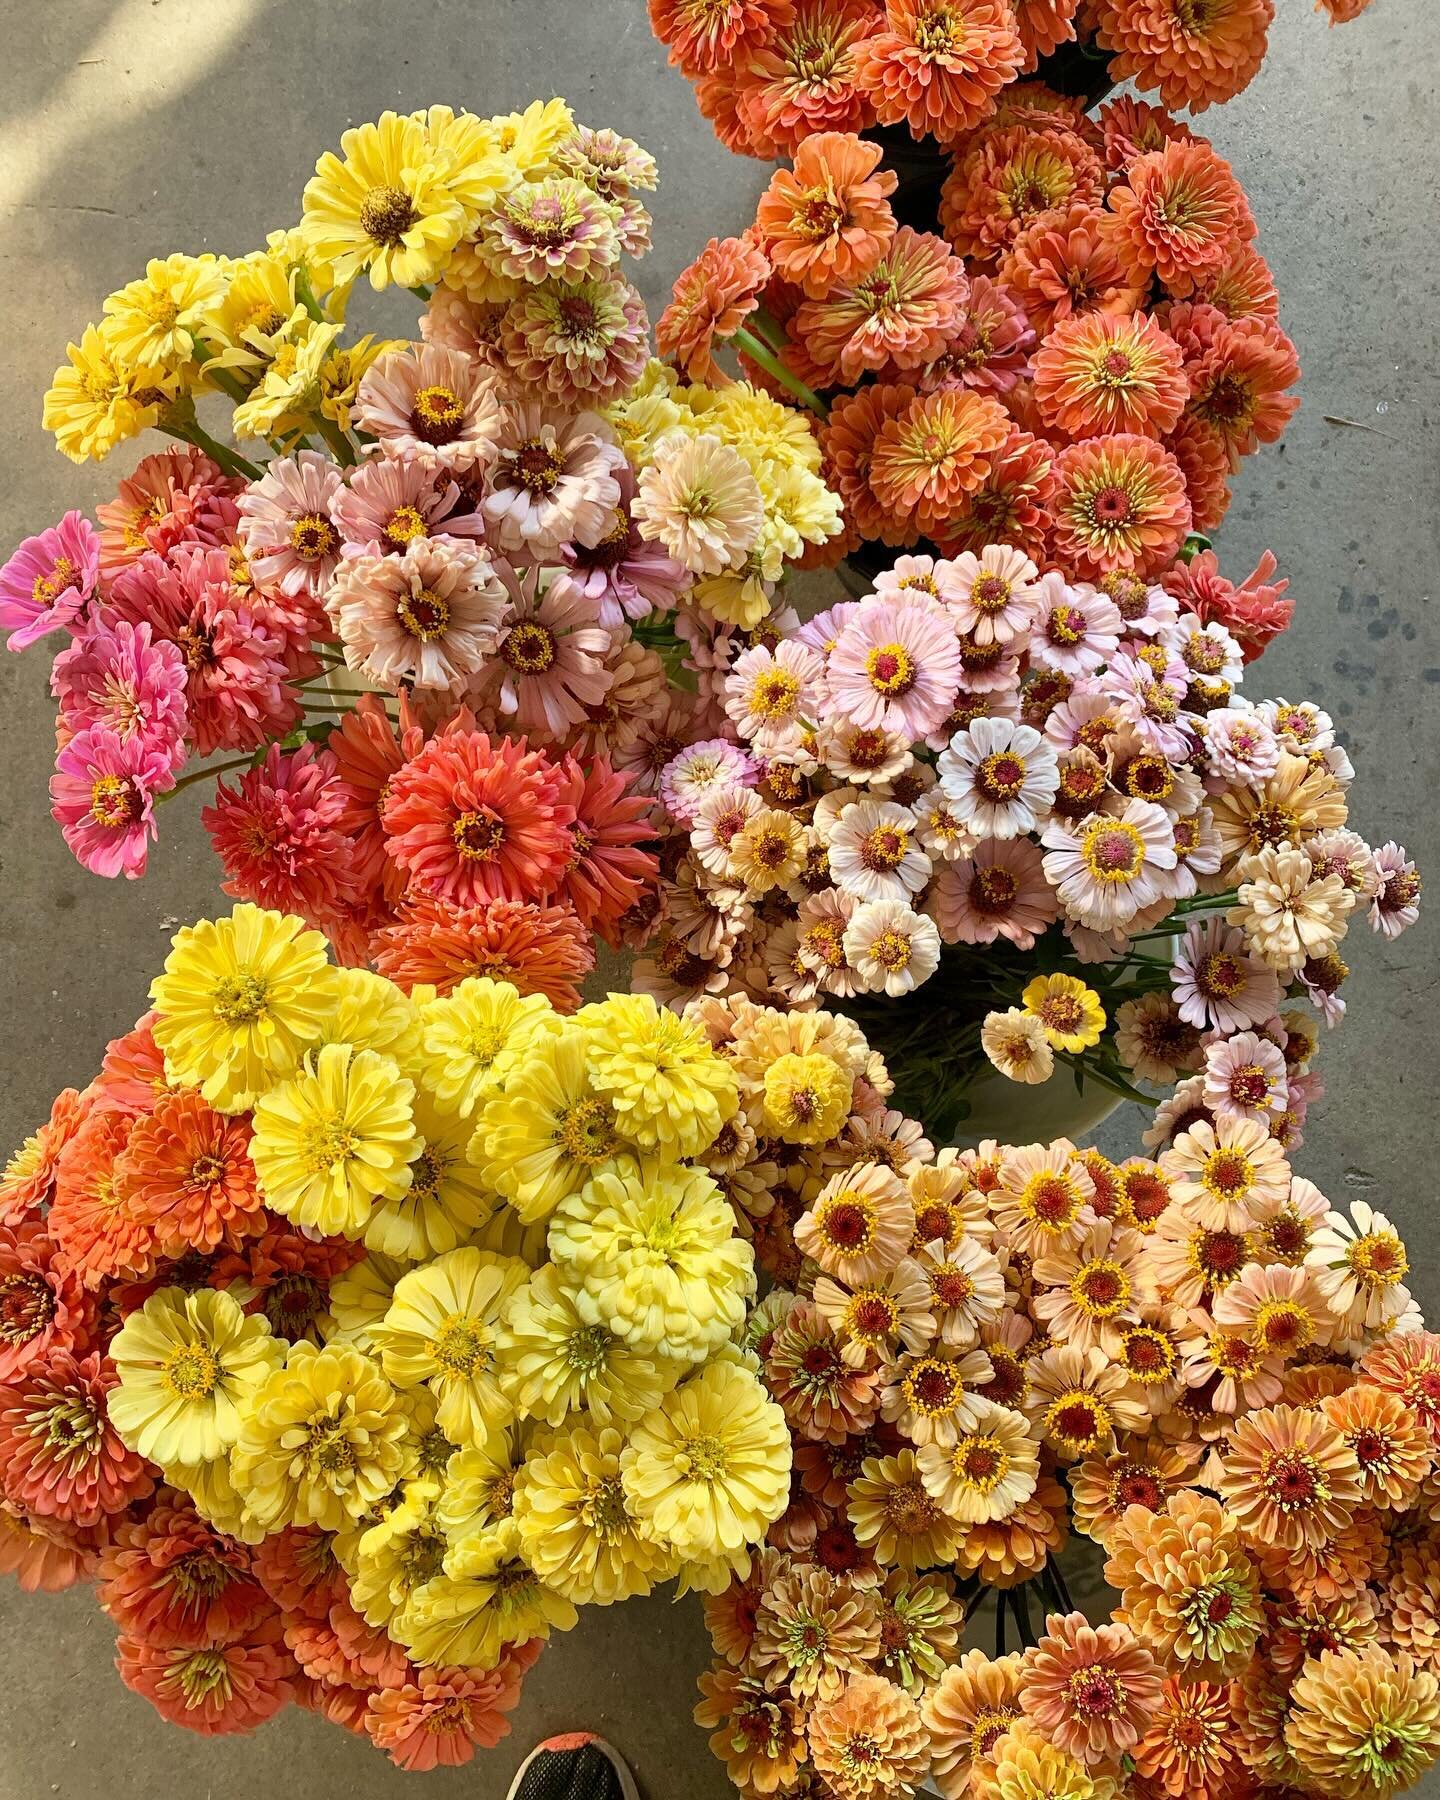 The main goal of the SVFC has and always will be to promote the growing, designing and sharing of locally grown flowers. We support the farmers who grow them, the designers who use them and the beautiful people who appreciate their importance and val